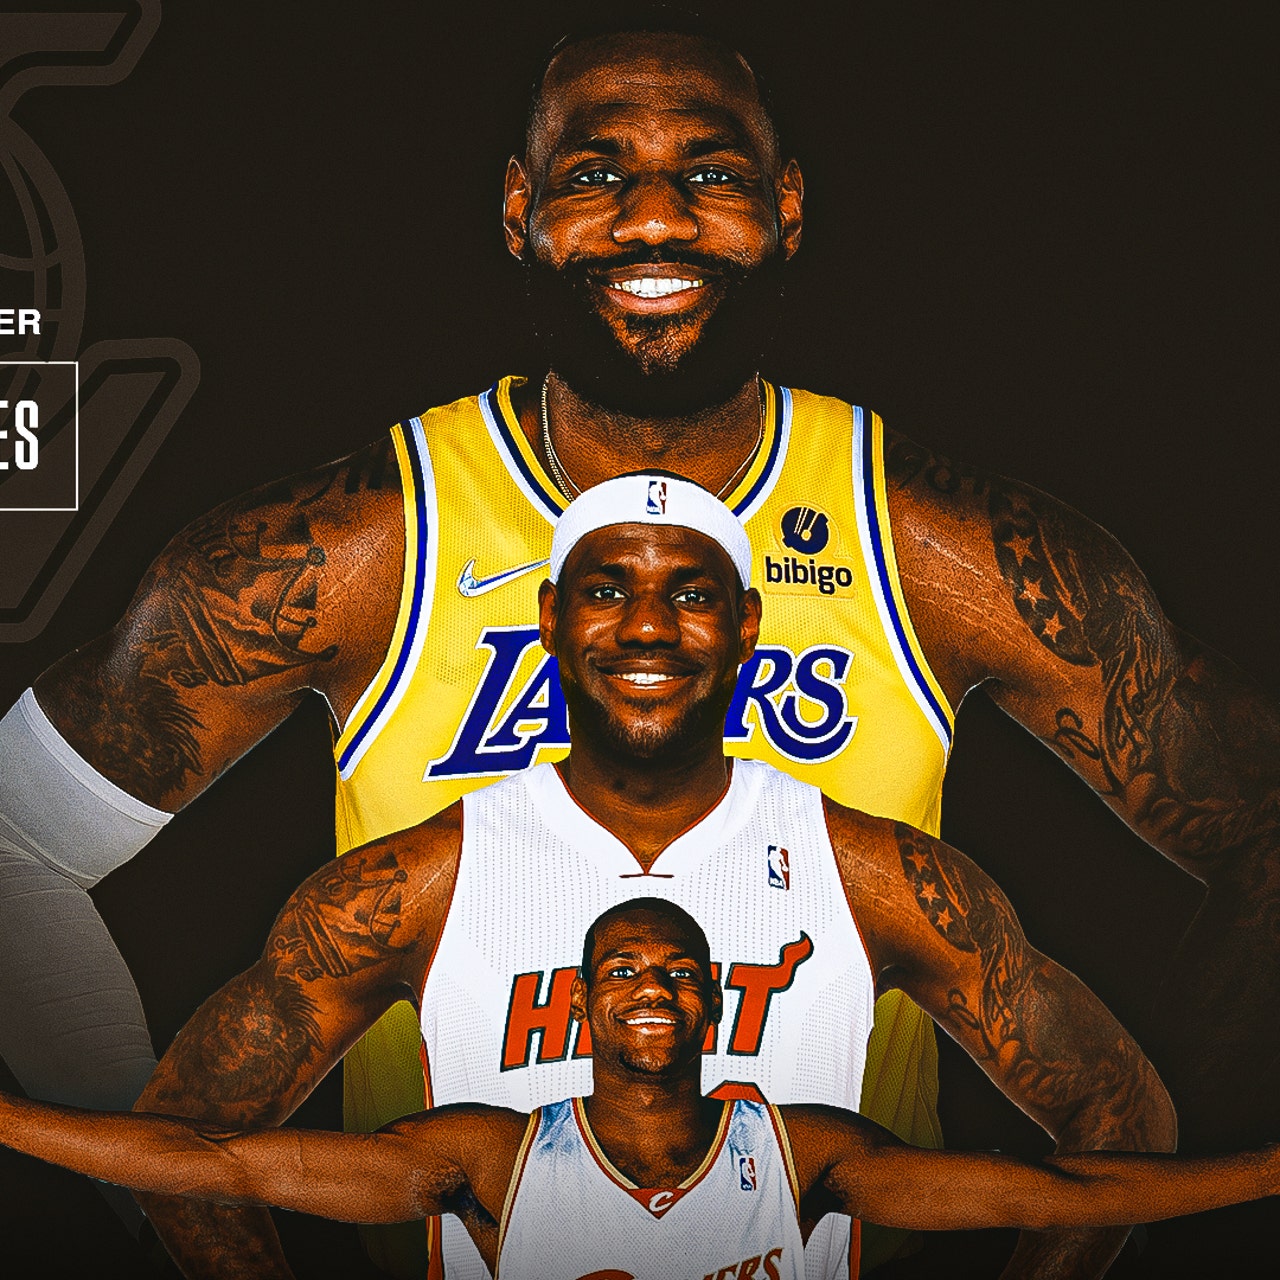 LeBron James is officially the points king of the NBA, surpassing